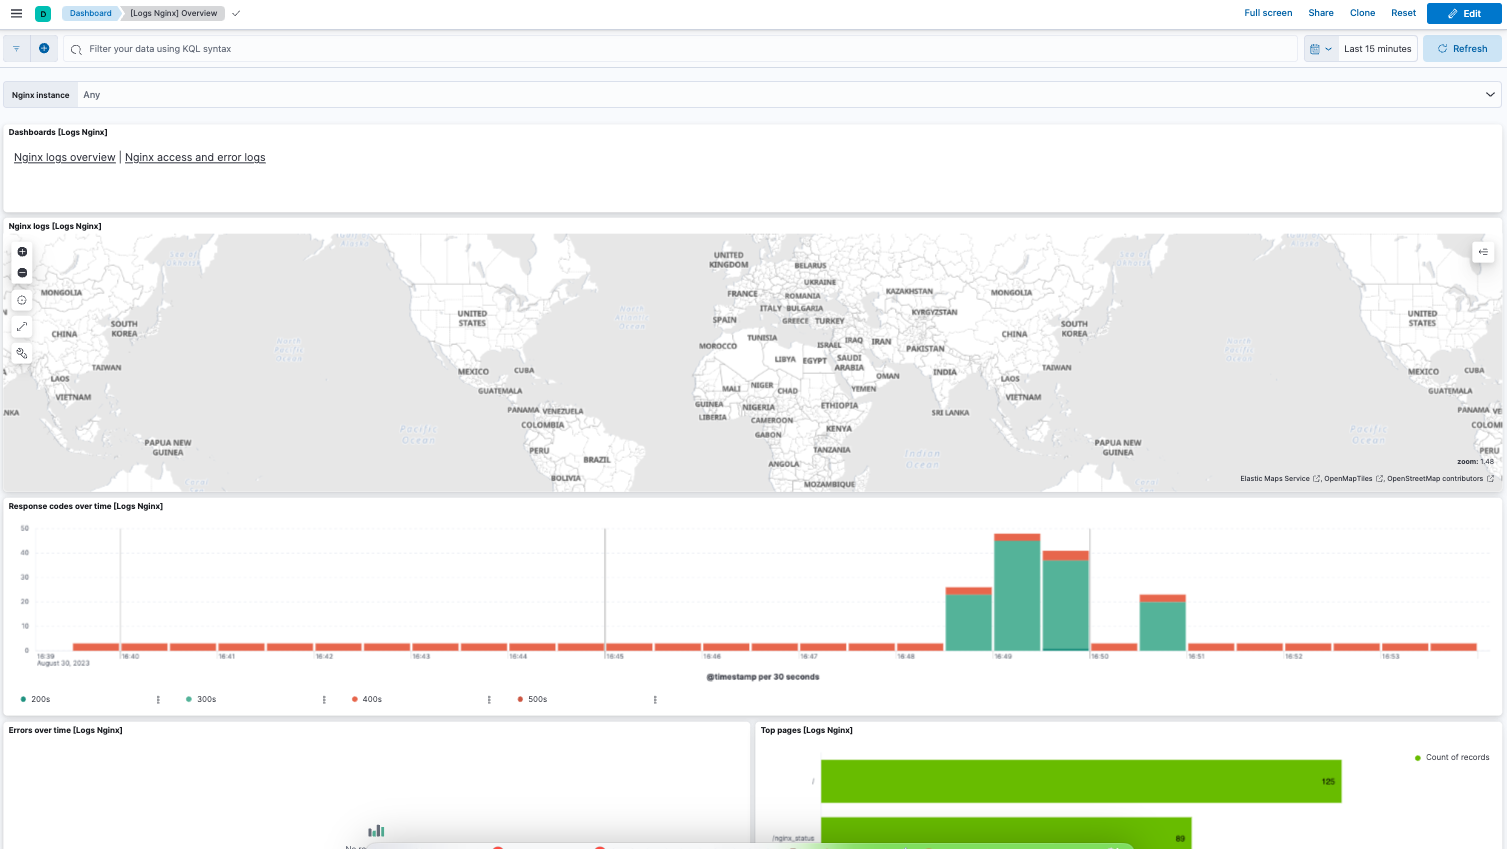 The nginx logs dashboard shows various visualizations on the nginx logs.